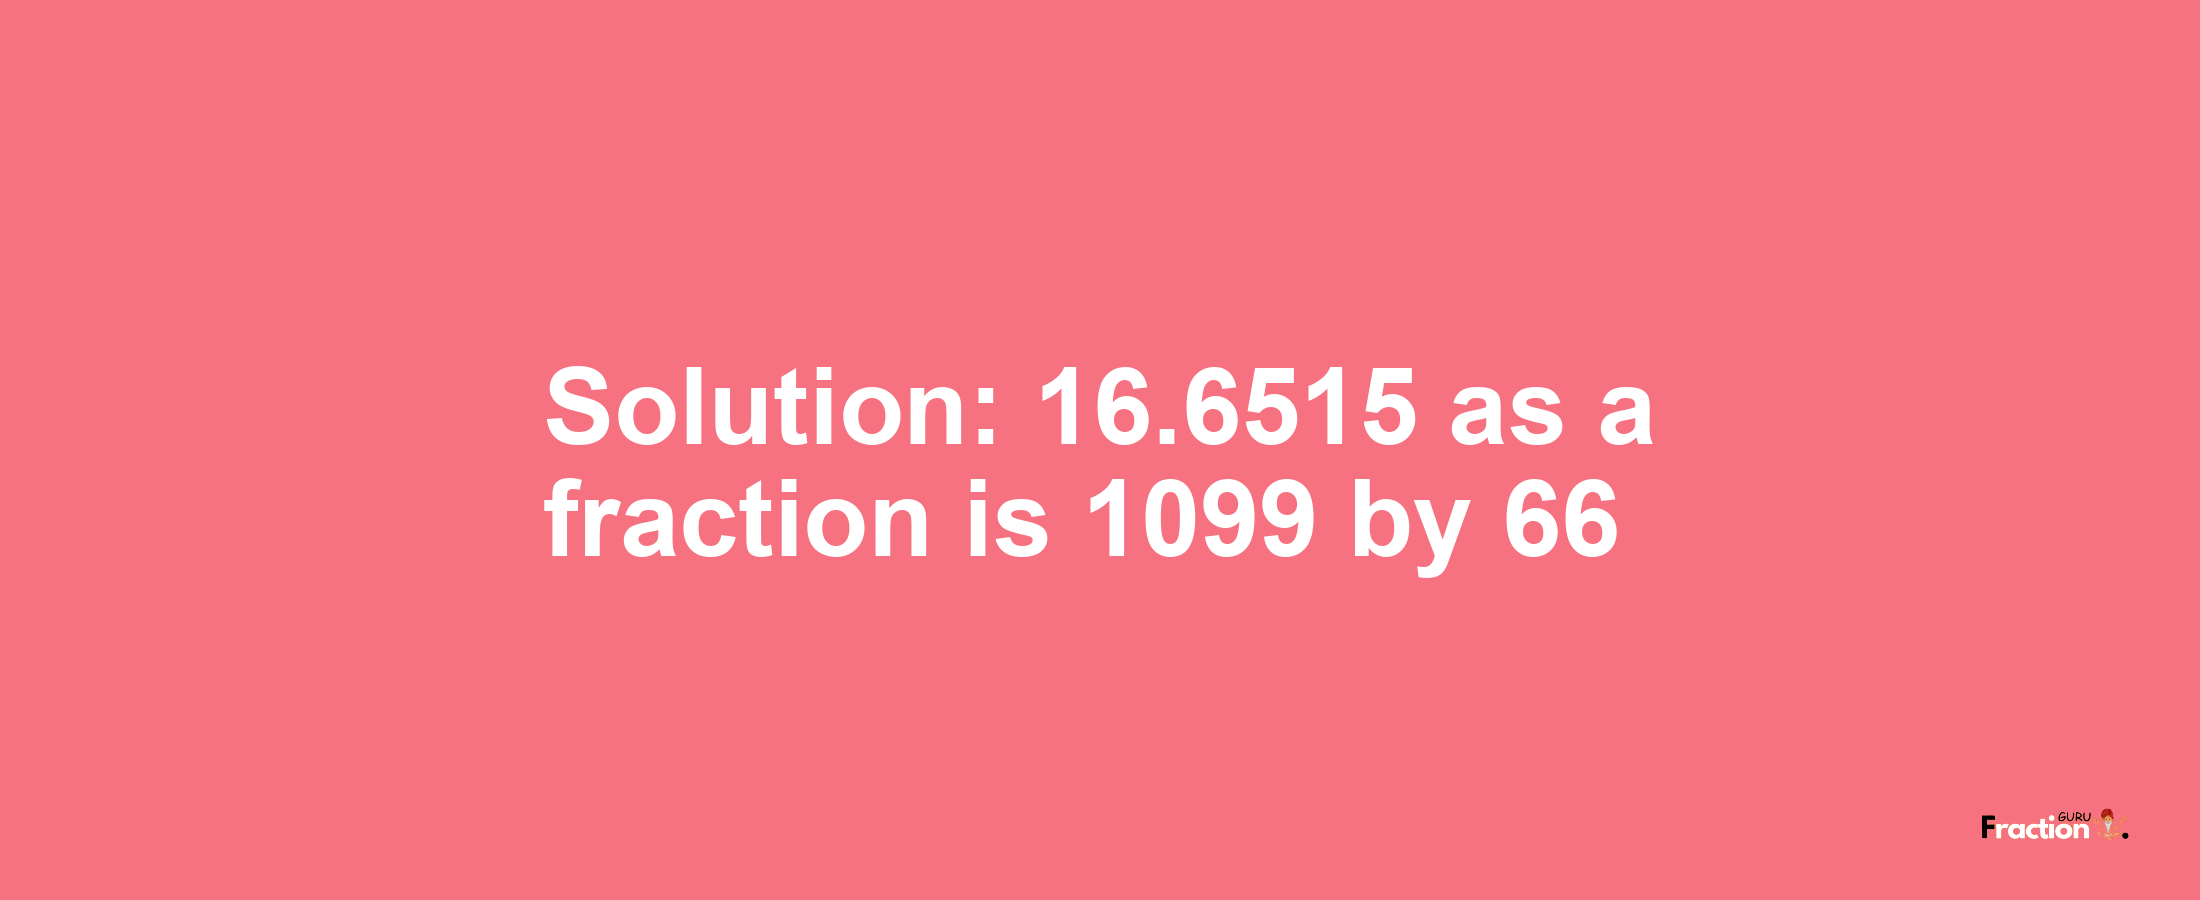 Solution:16.6515 as a fraction is 1099/66